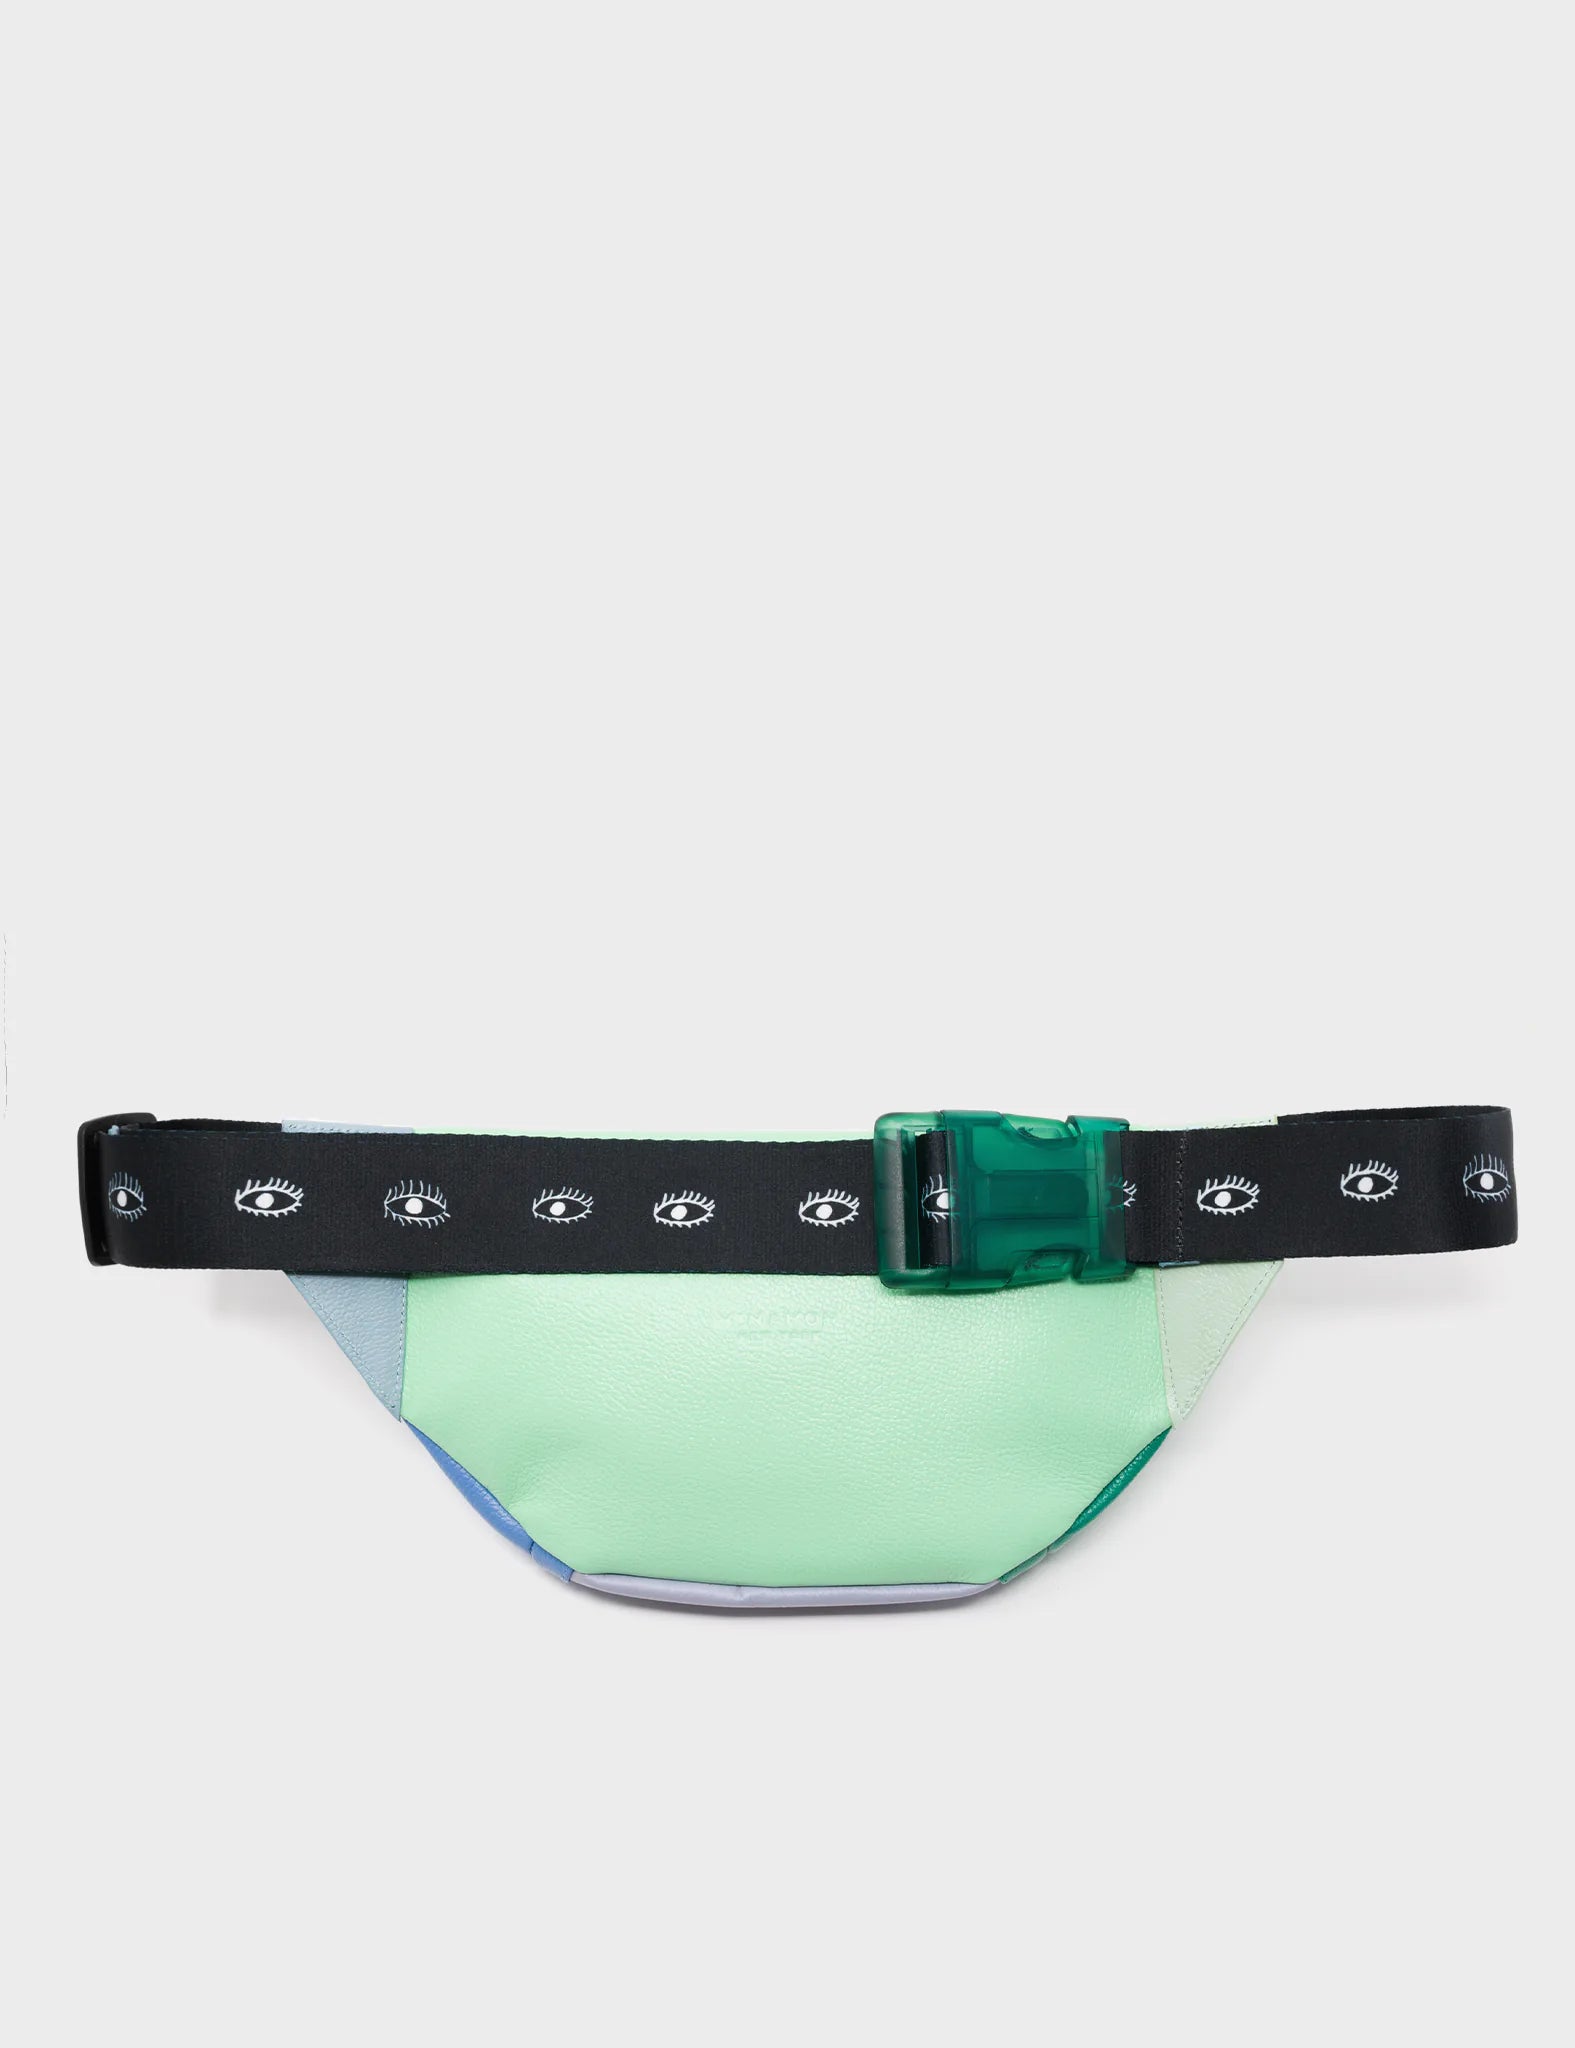 Harold Fanny Pack Green and Blue Leather - Eyes Embroidery - Back